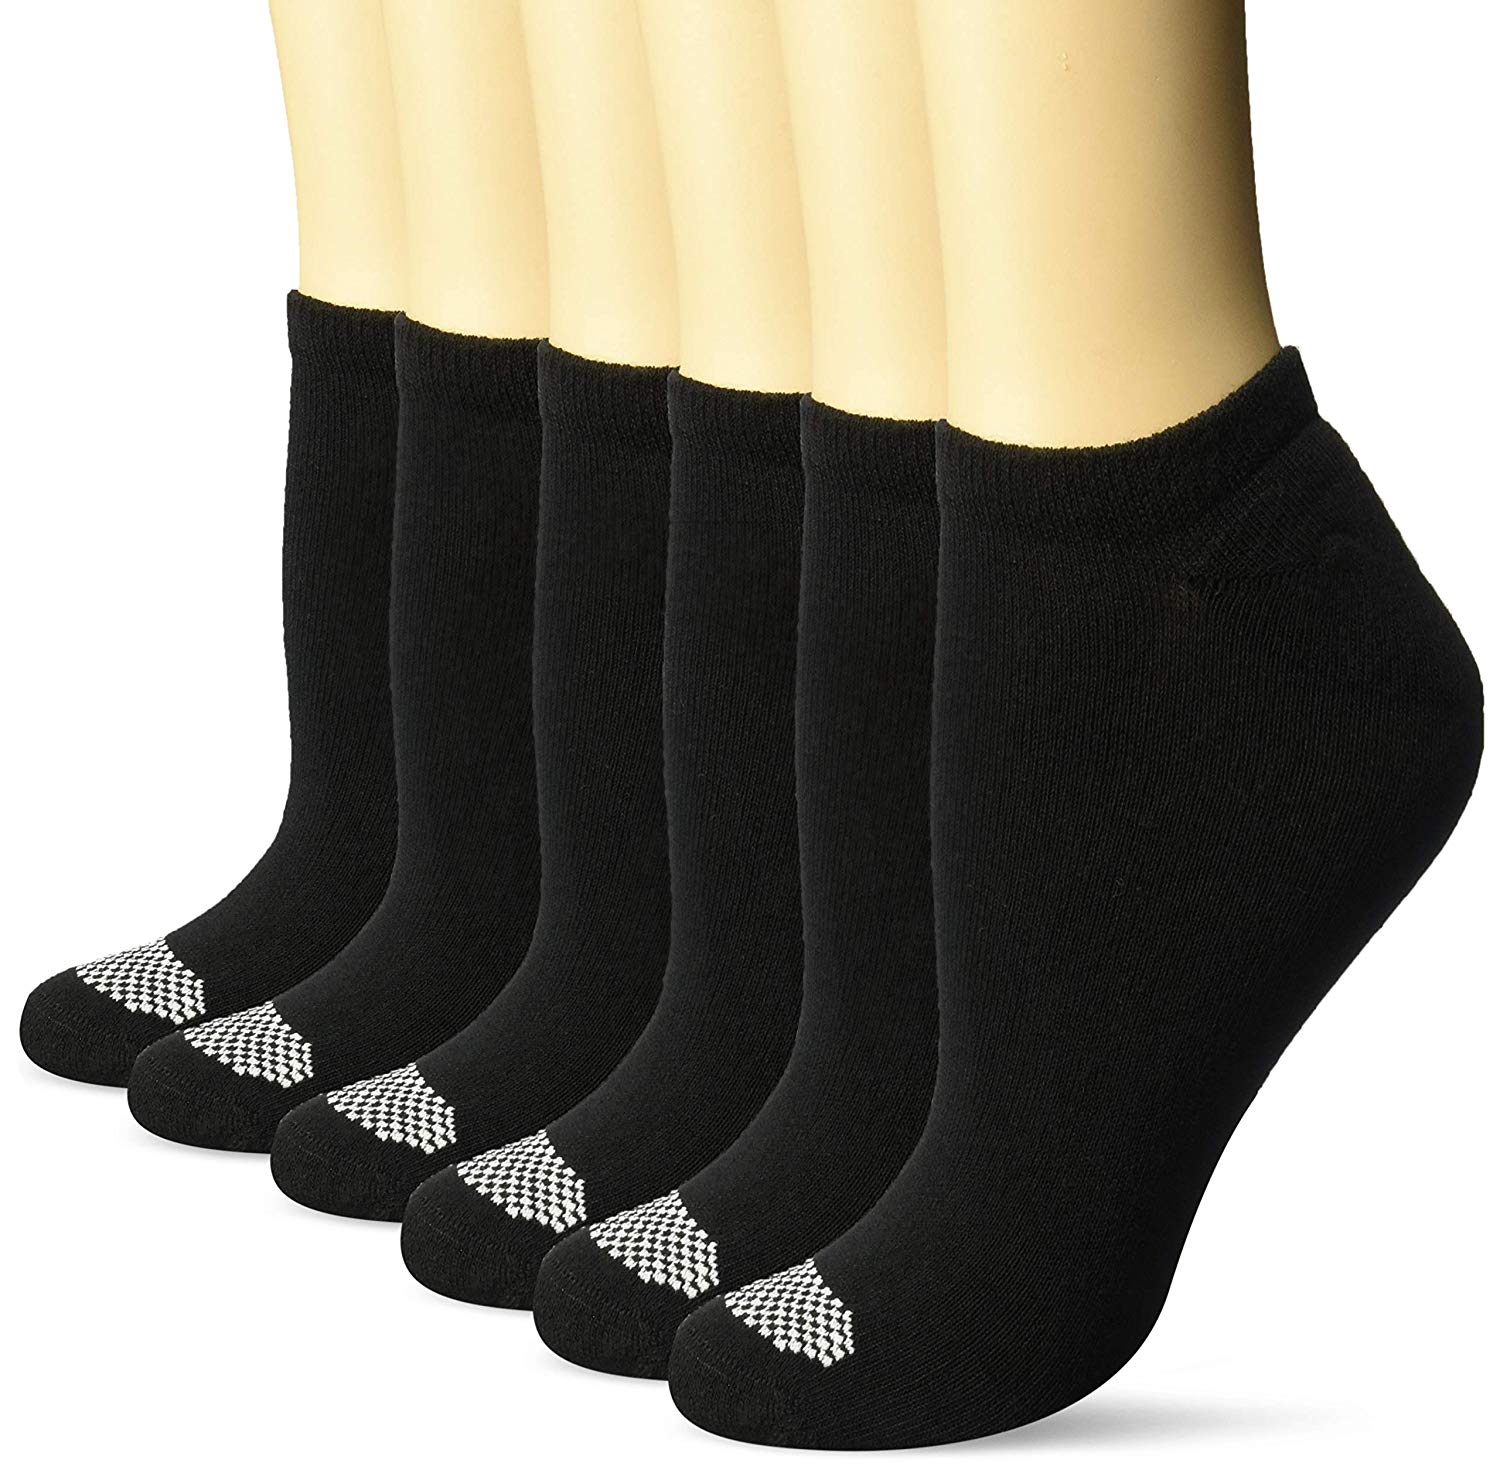 Hanes Women's No Show Socks Extended Size,, Black/W/White Vent, Size 8. ...